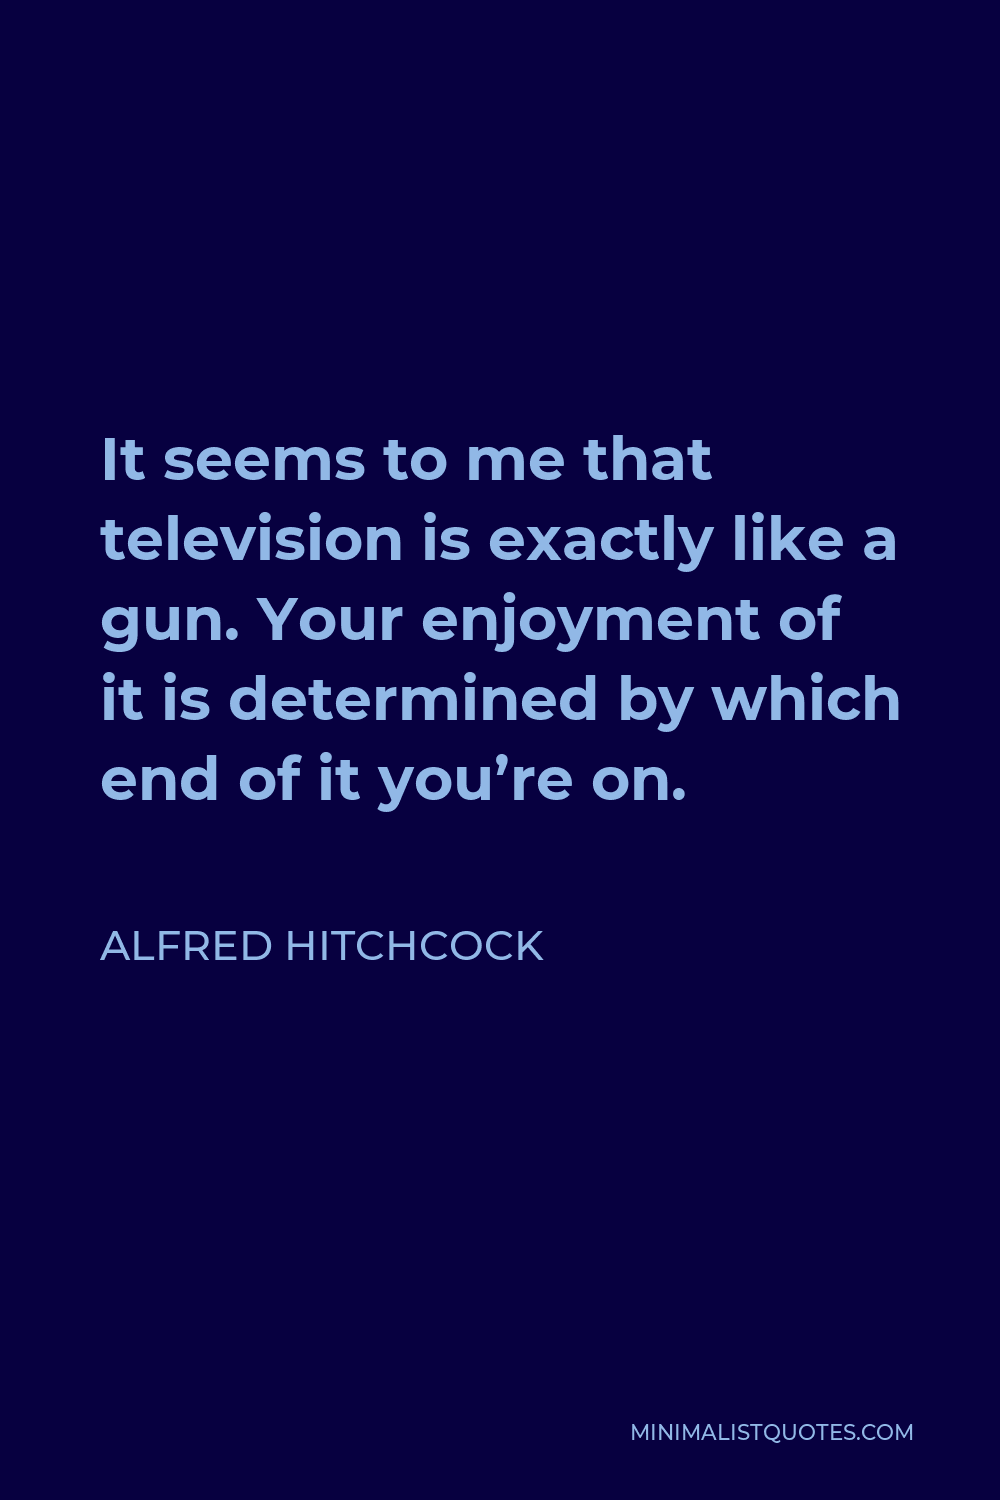 Alfred Hitchcock Quote - It seems to me that television is exactly like a gun. Your enjoyment of it is determined by which end of it you’re on.